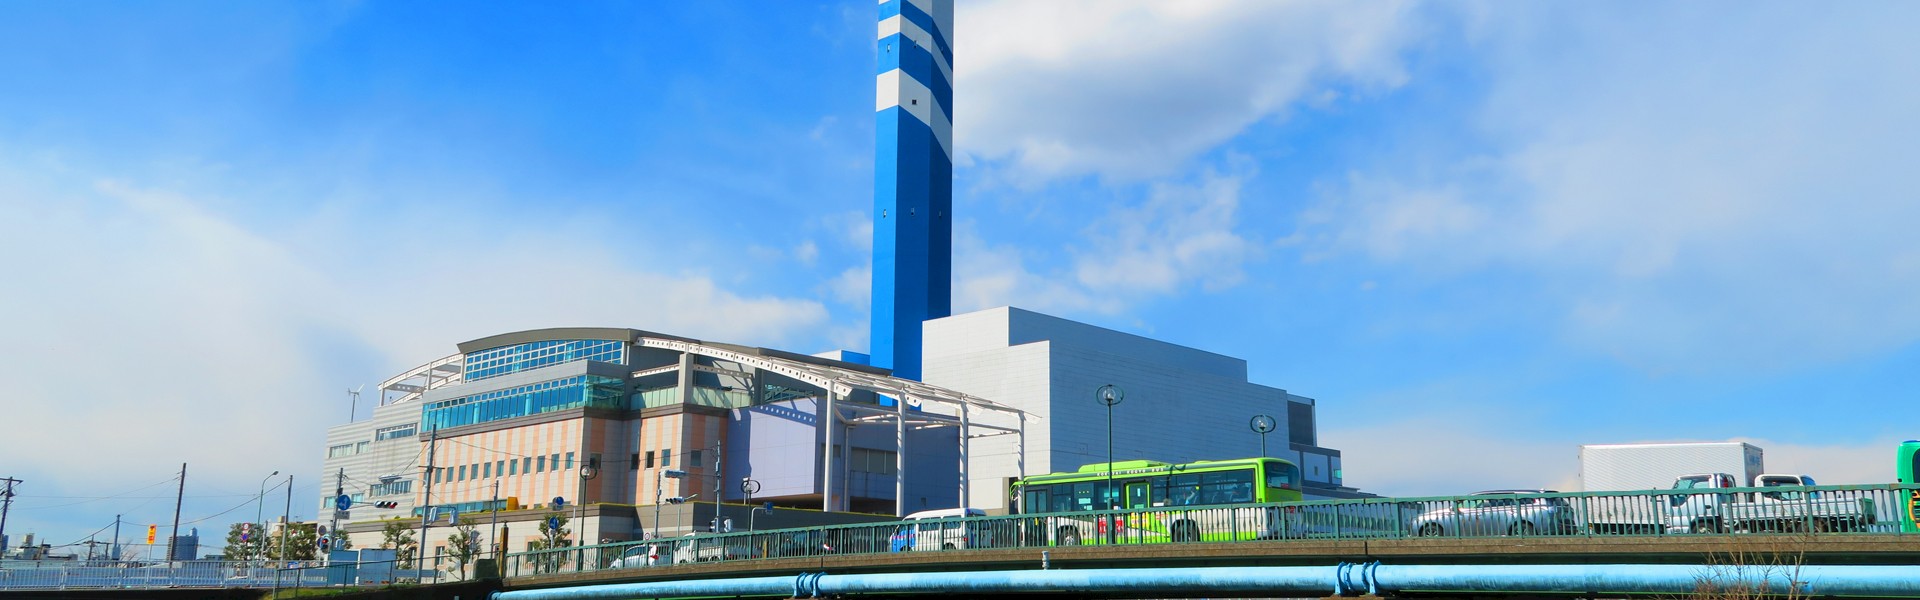 We use gasification to convert municipal solid wastes into clean electricity & CO2e credits.